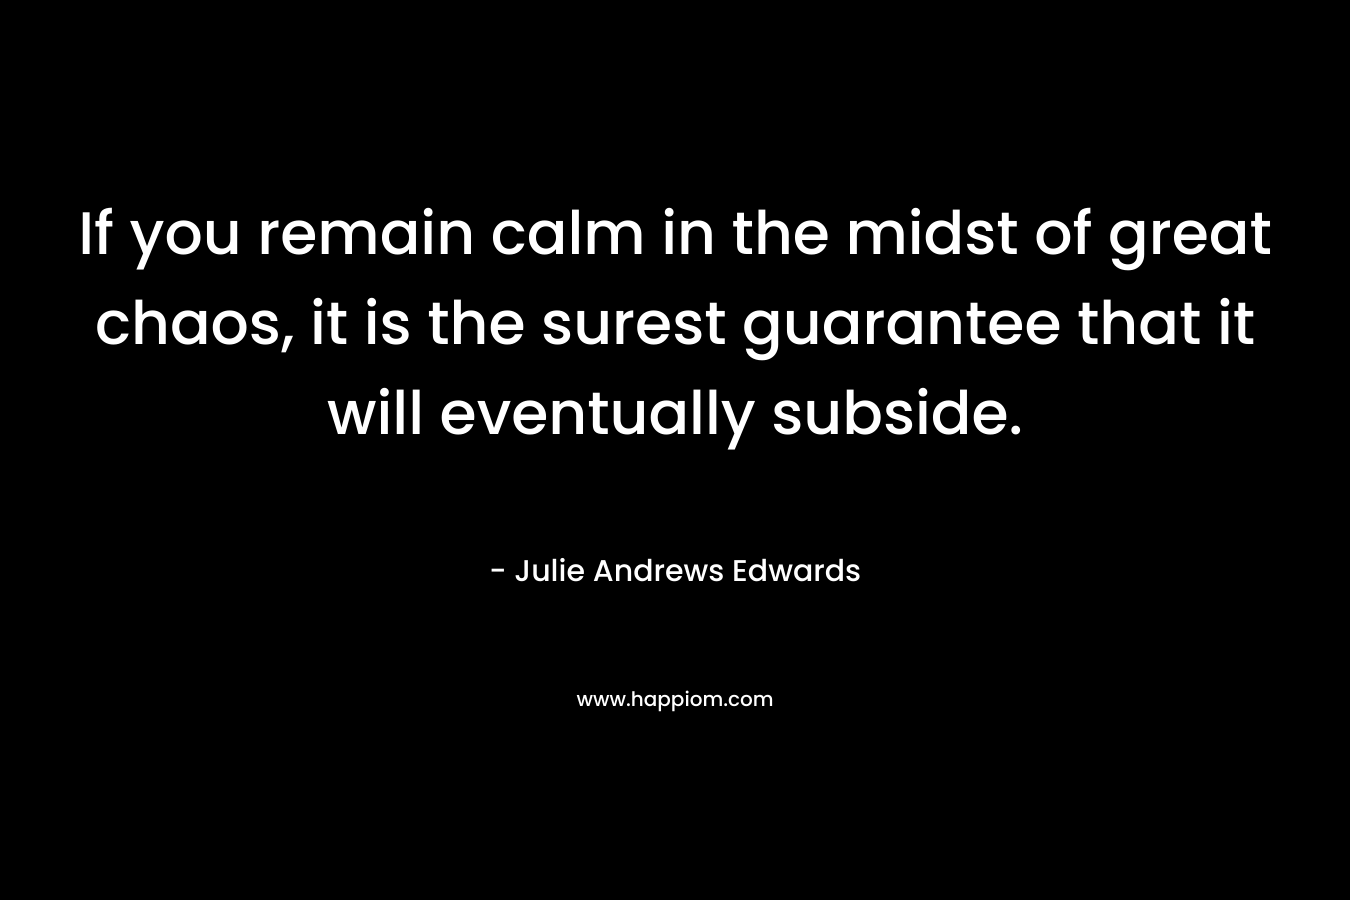 If you remain calm in the midst of great chaos, it is the surest guarantee that it will eventually subside. – Julie Andrews Edwards